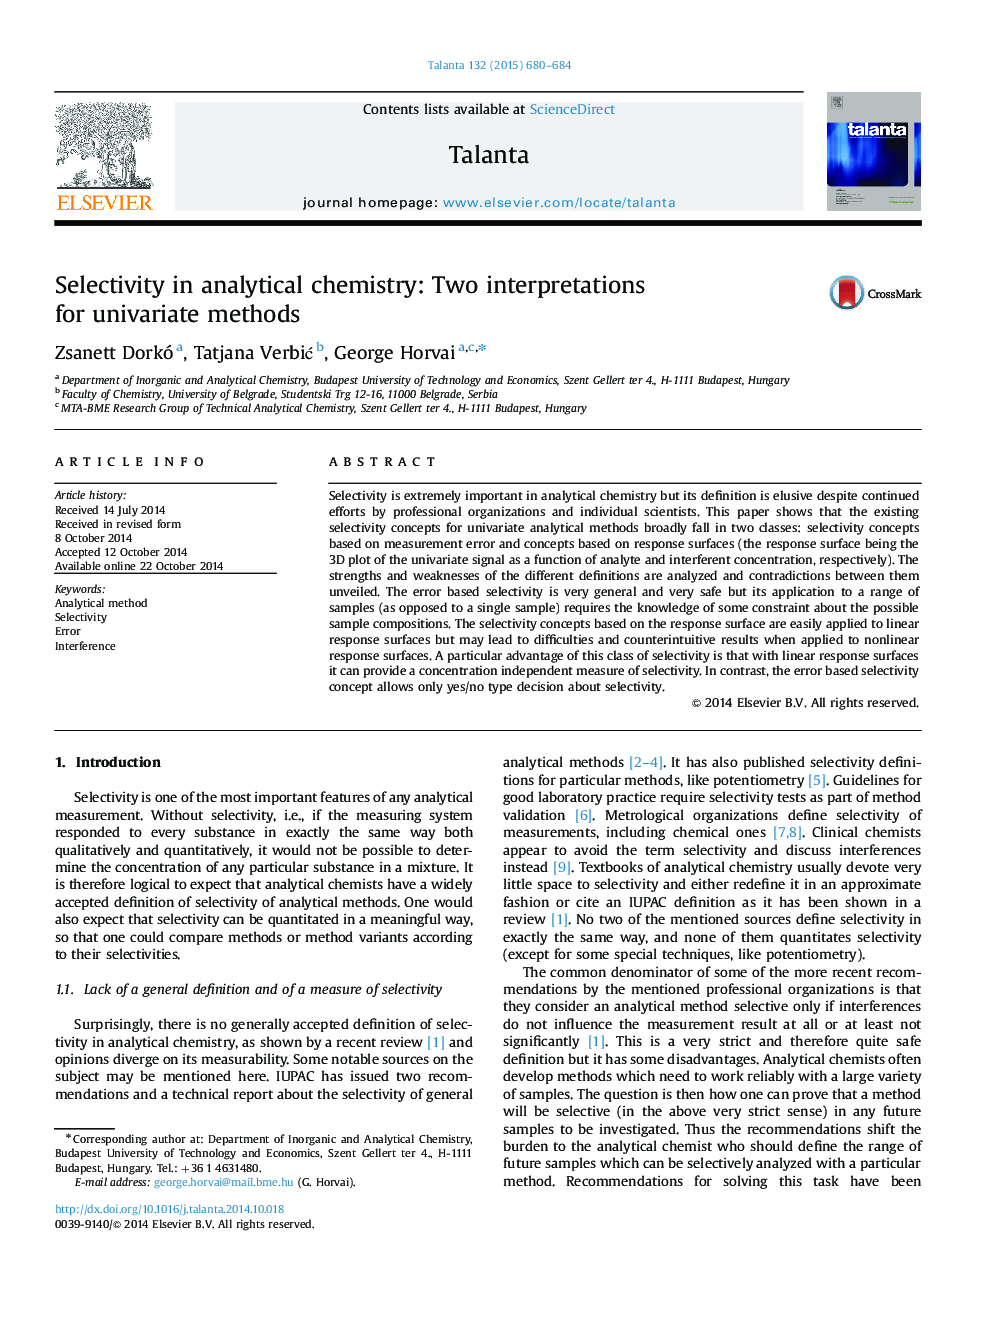 Selectivity in analytical chemistry: Two interpretations for univariate methods